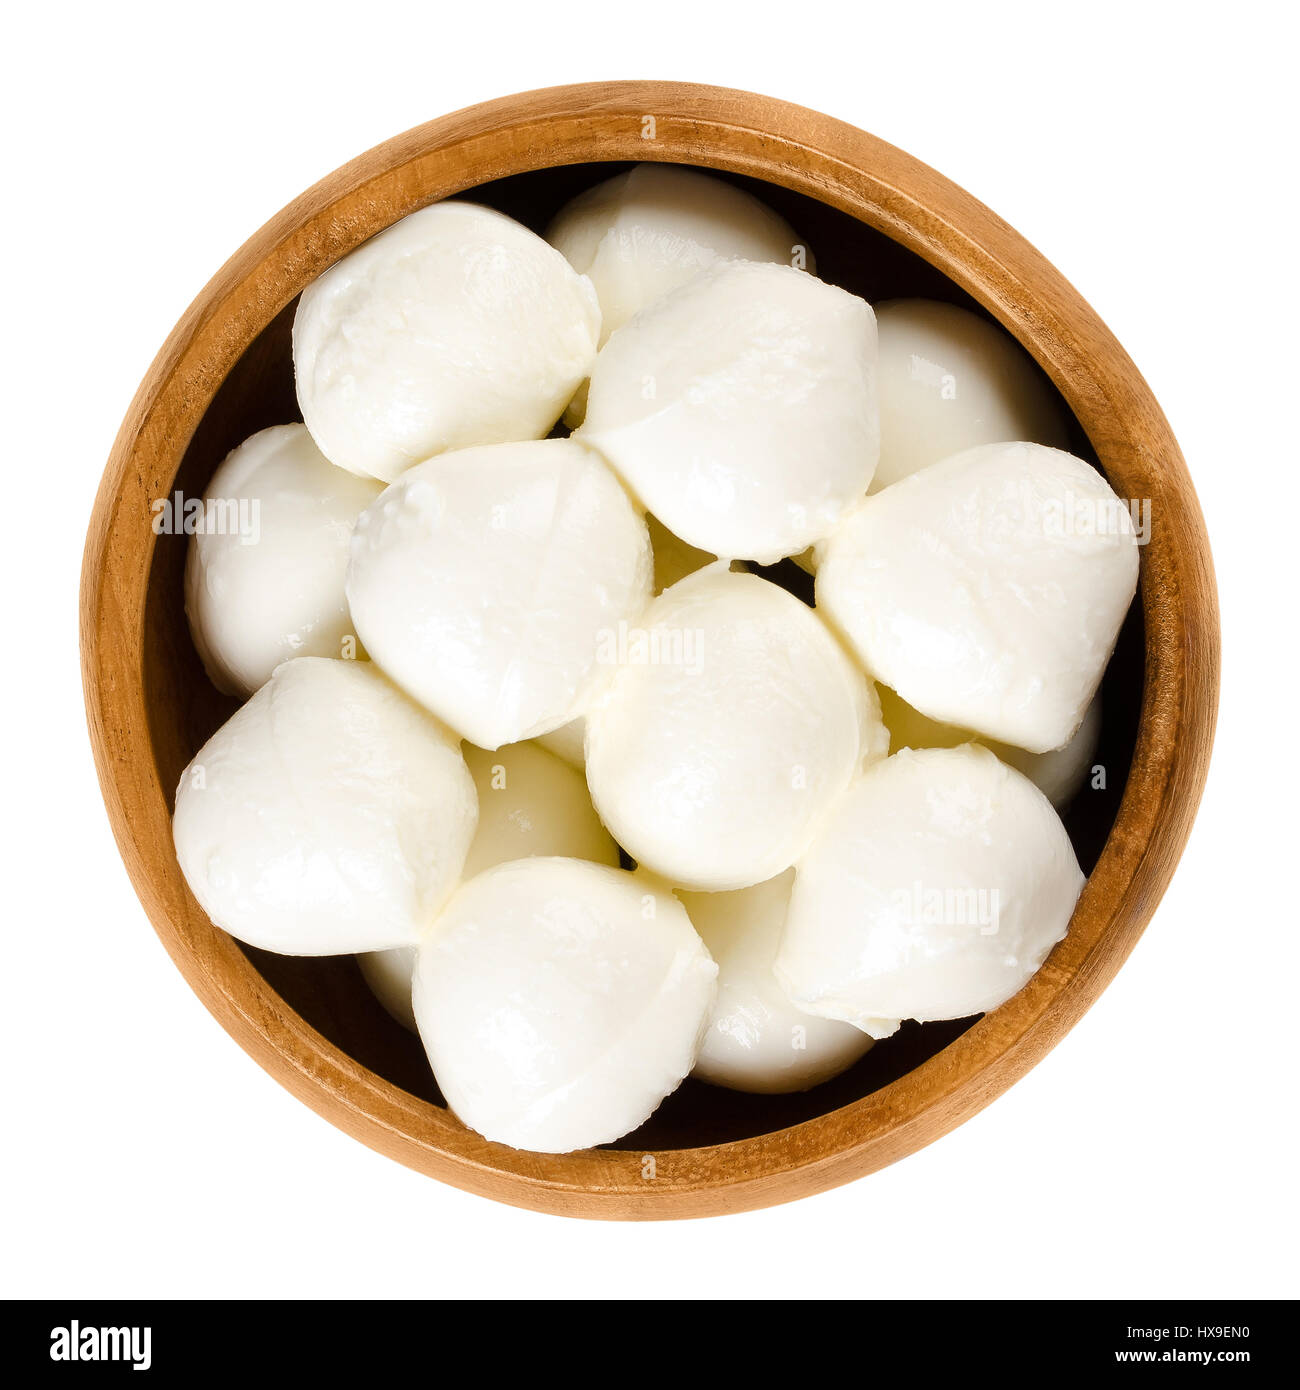 Small mozzarella balls in wooden bowl. Fresh white southern Italian cheese  made from milk by the pasta filata method, also called bambini bocconcini  Stock Photo - Alamy